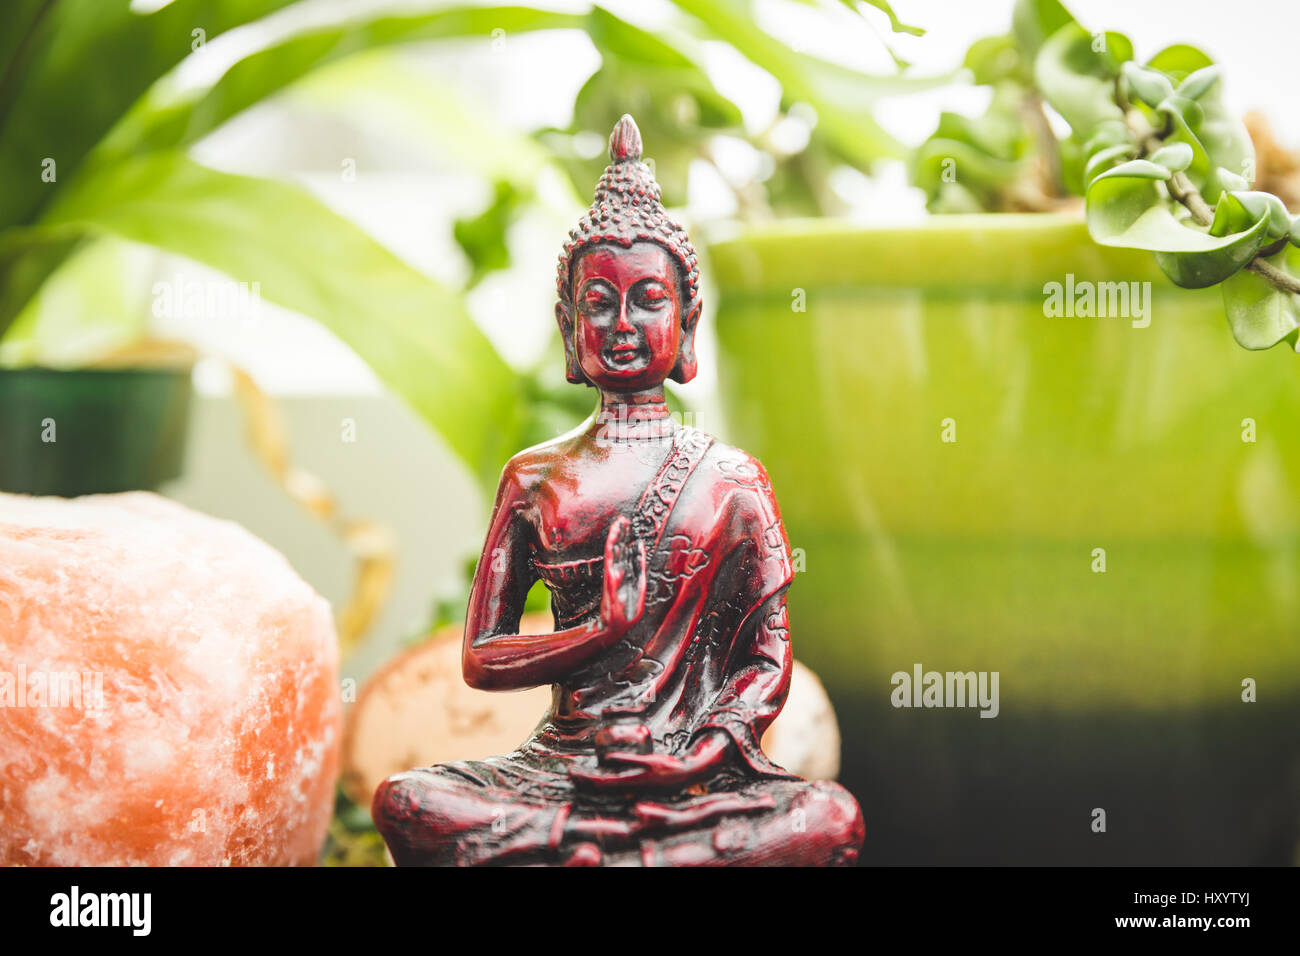 Religious figure or sculpture, plants, crystal salt rock, and other decorations on a shelf or bookcase. Stock Photo